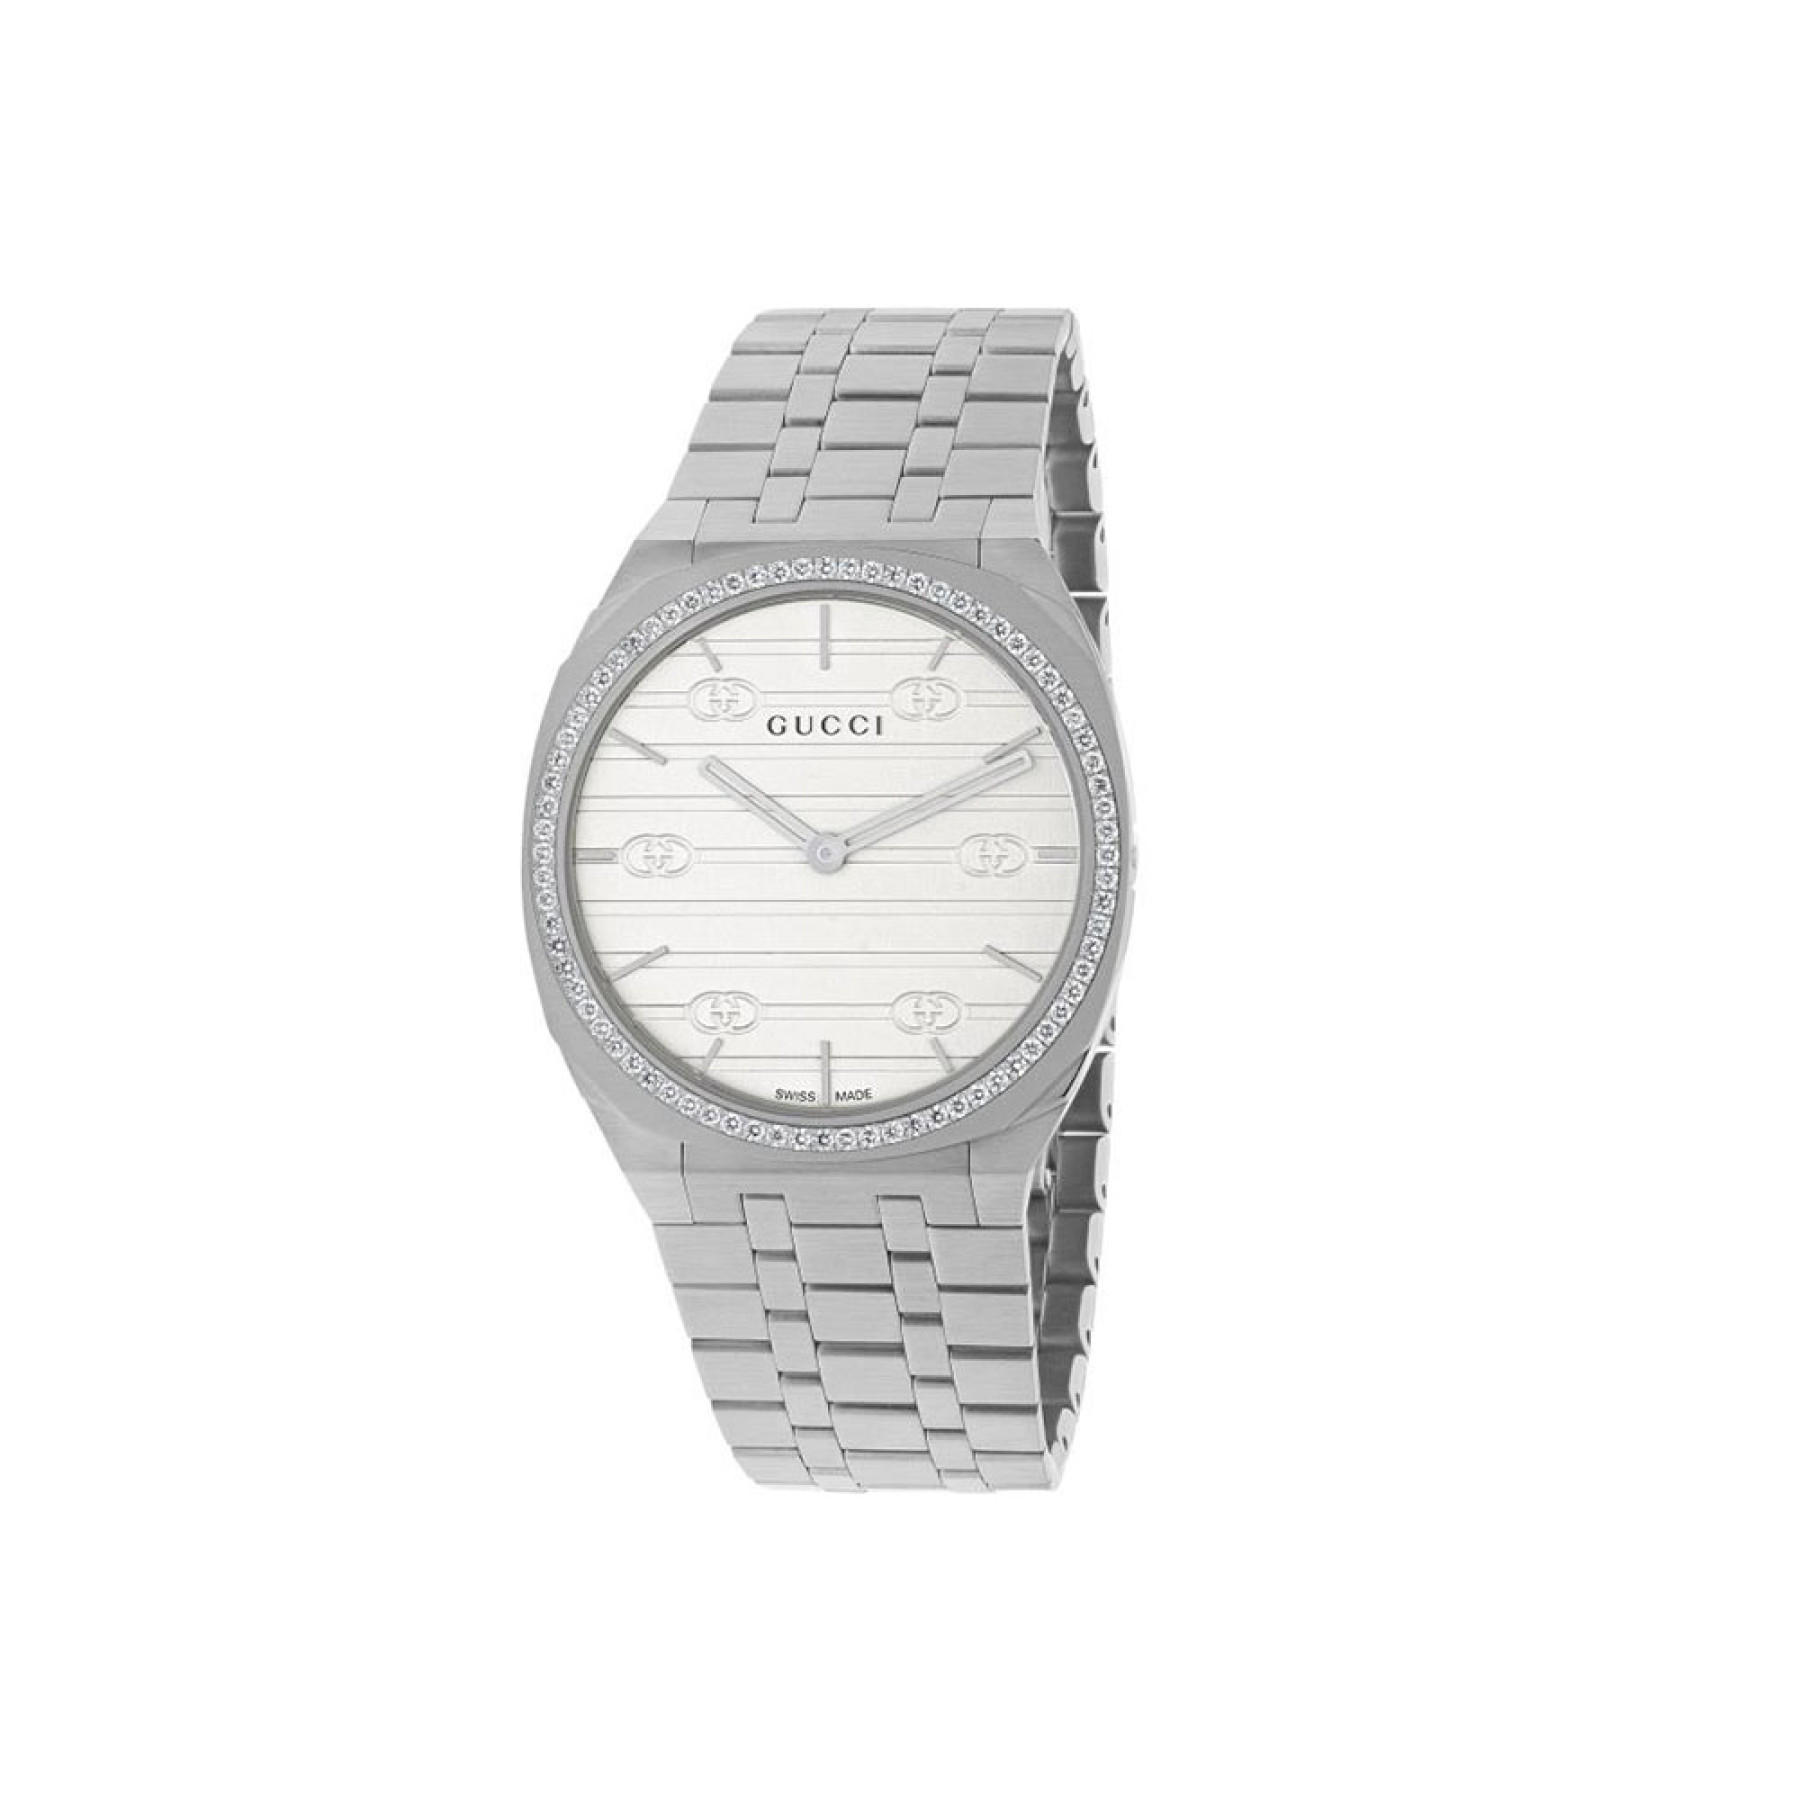 Gucci 25H 34mm Thin Watch with Bezel